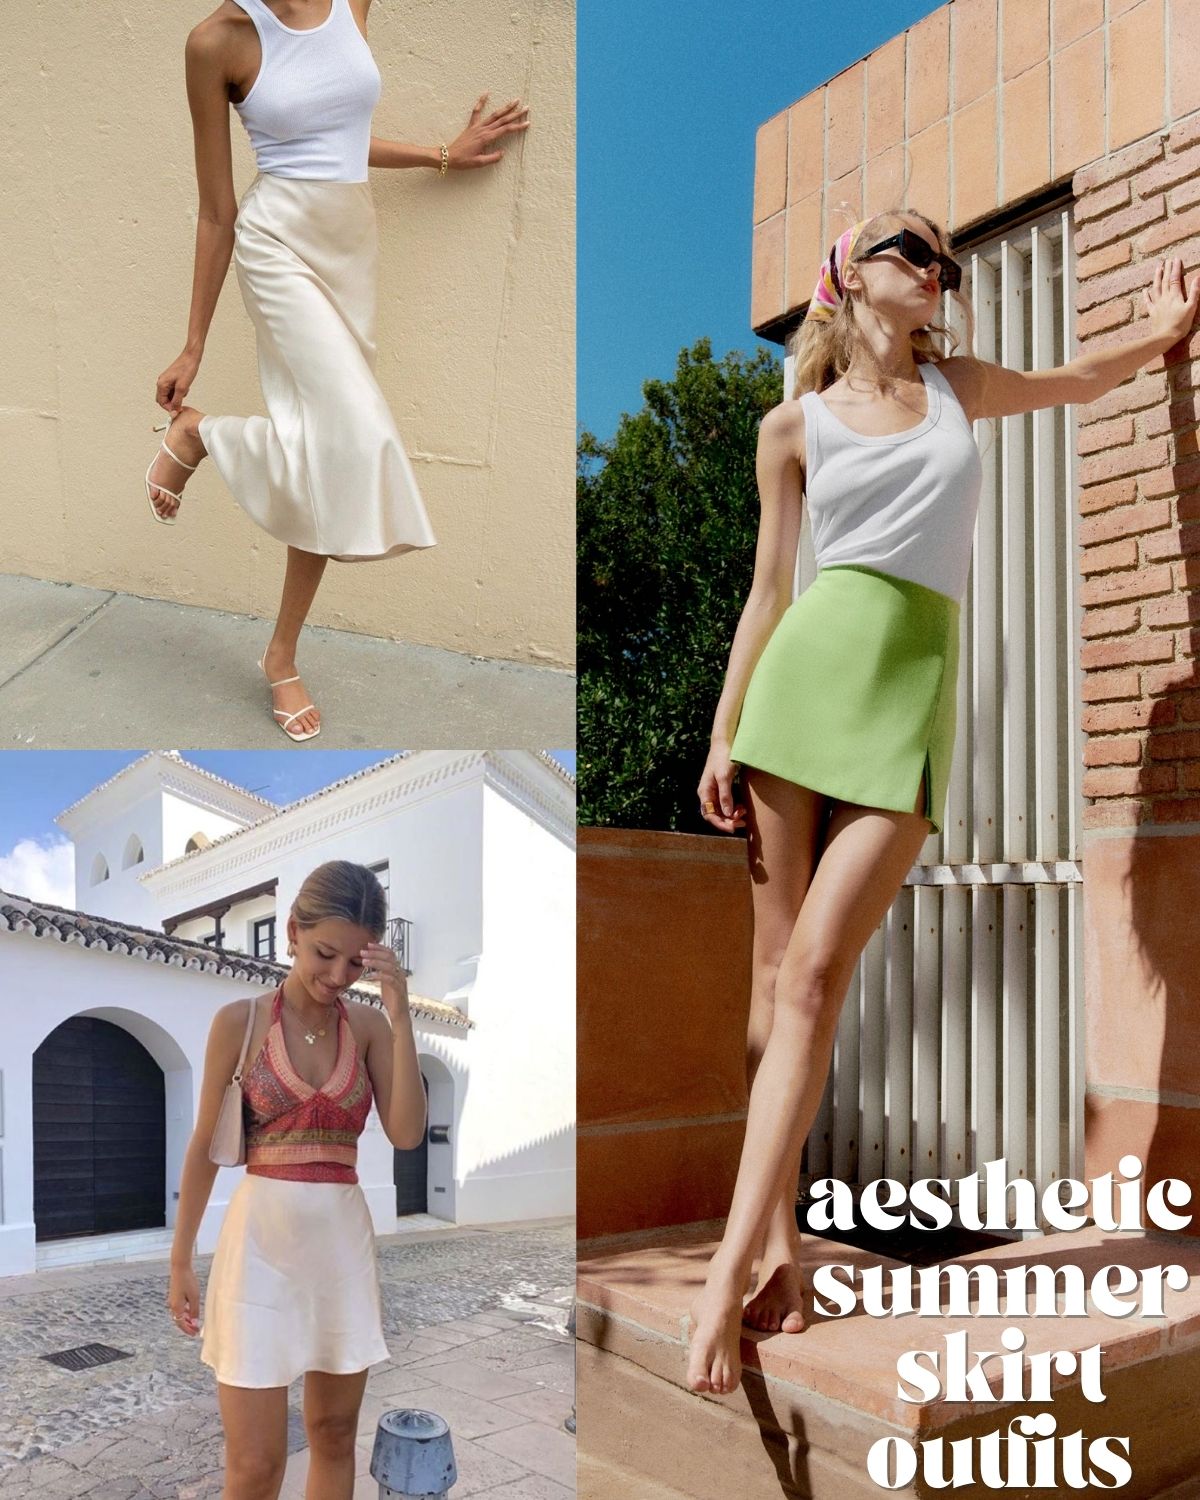 Three aesthetic summer outfits